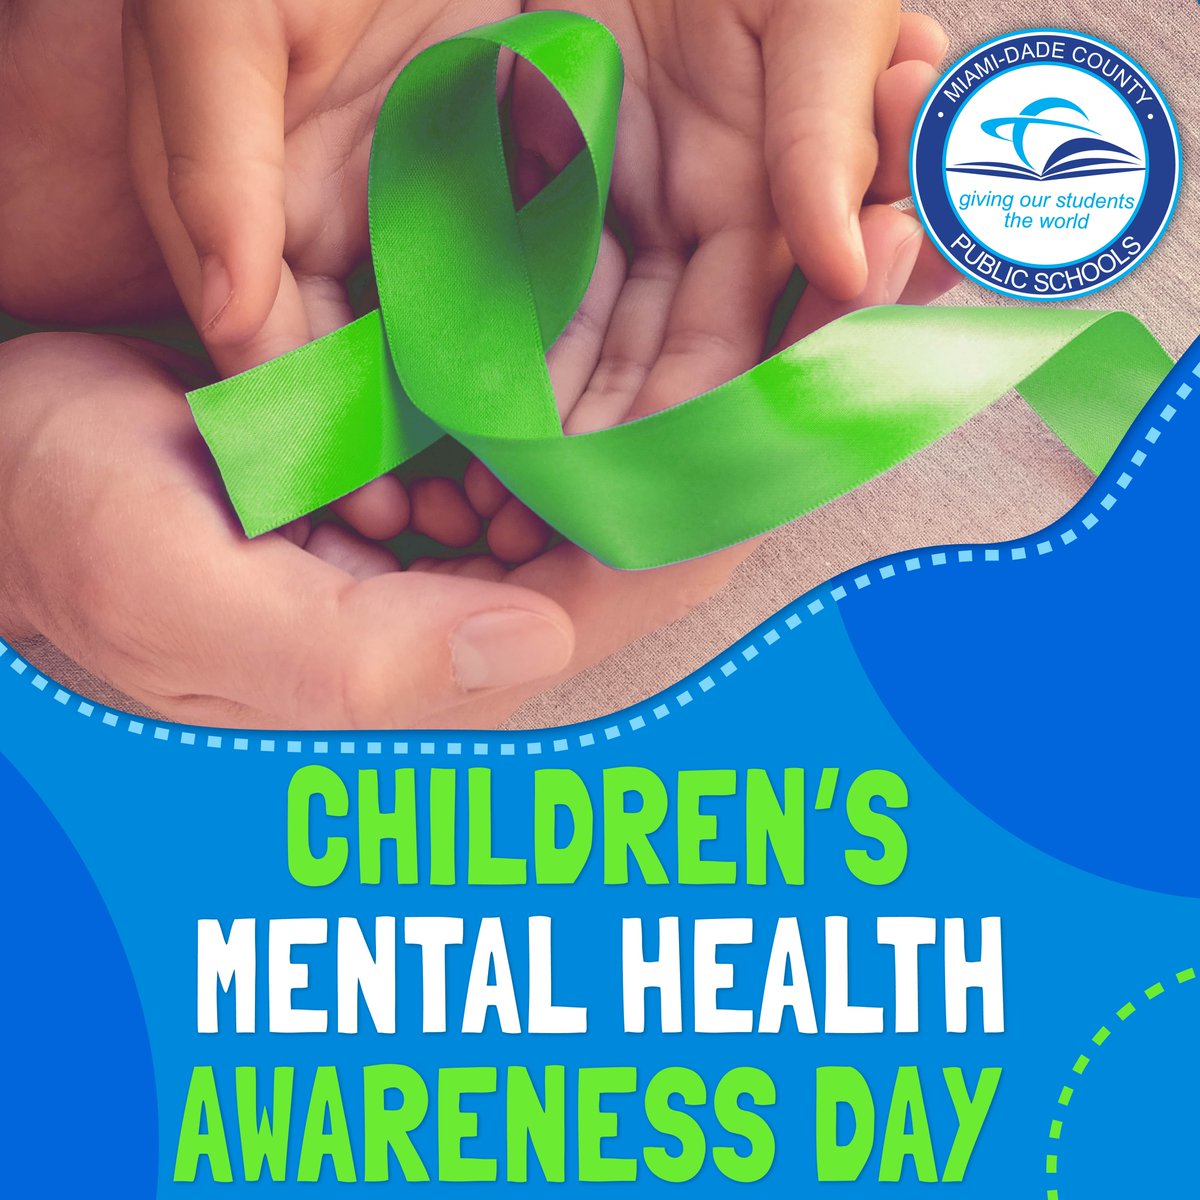 Today on #NationalChildrensMentalHealthDay, let’s prioritize supporting the well-being of our students. Together, let’s raise awareness, foster empathy, and provide resources to ensure every child feels valued, heard, and supported. Their mental health matters today & every day.